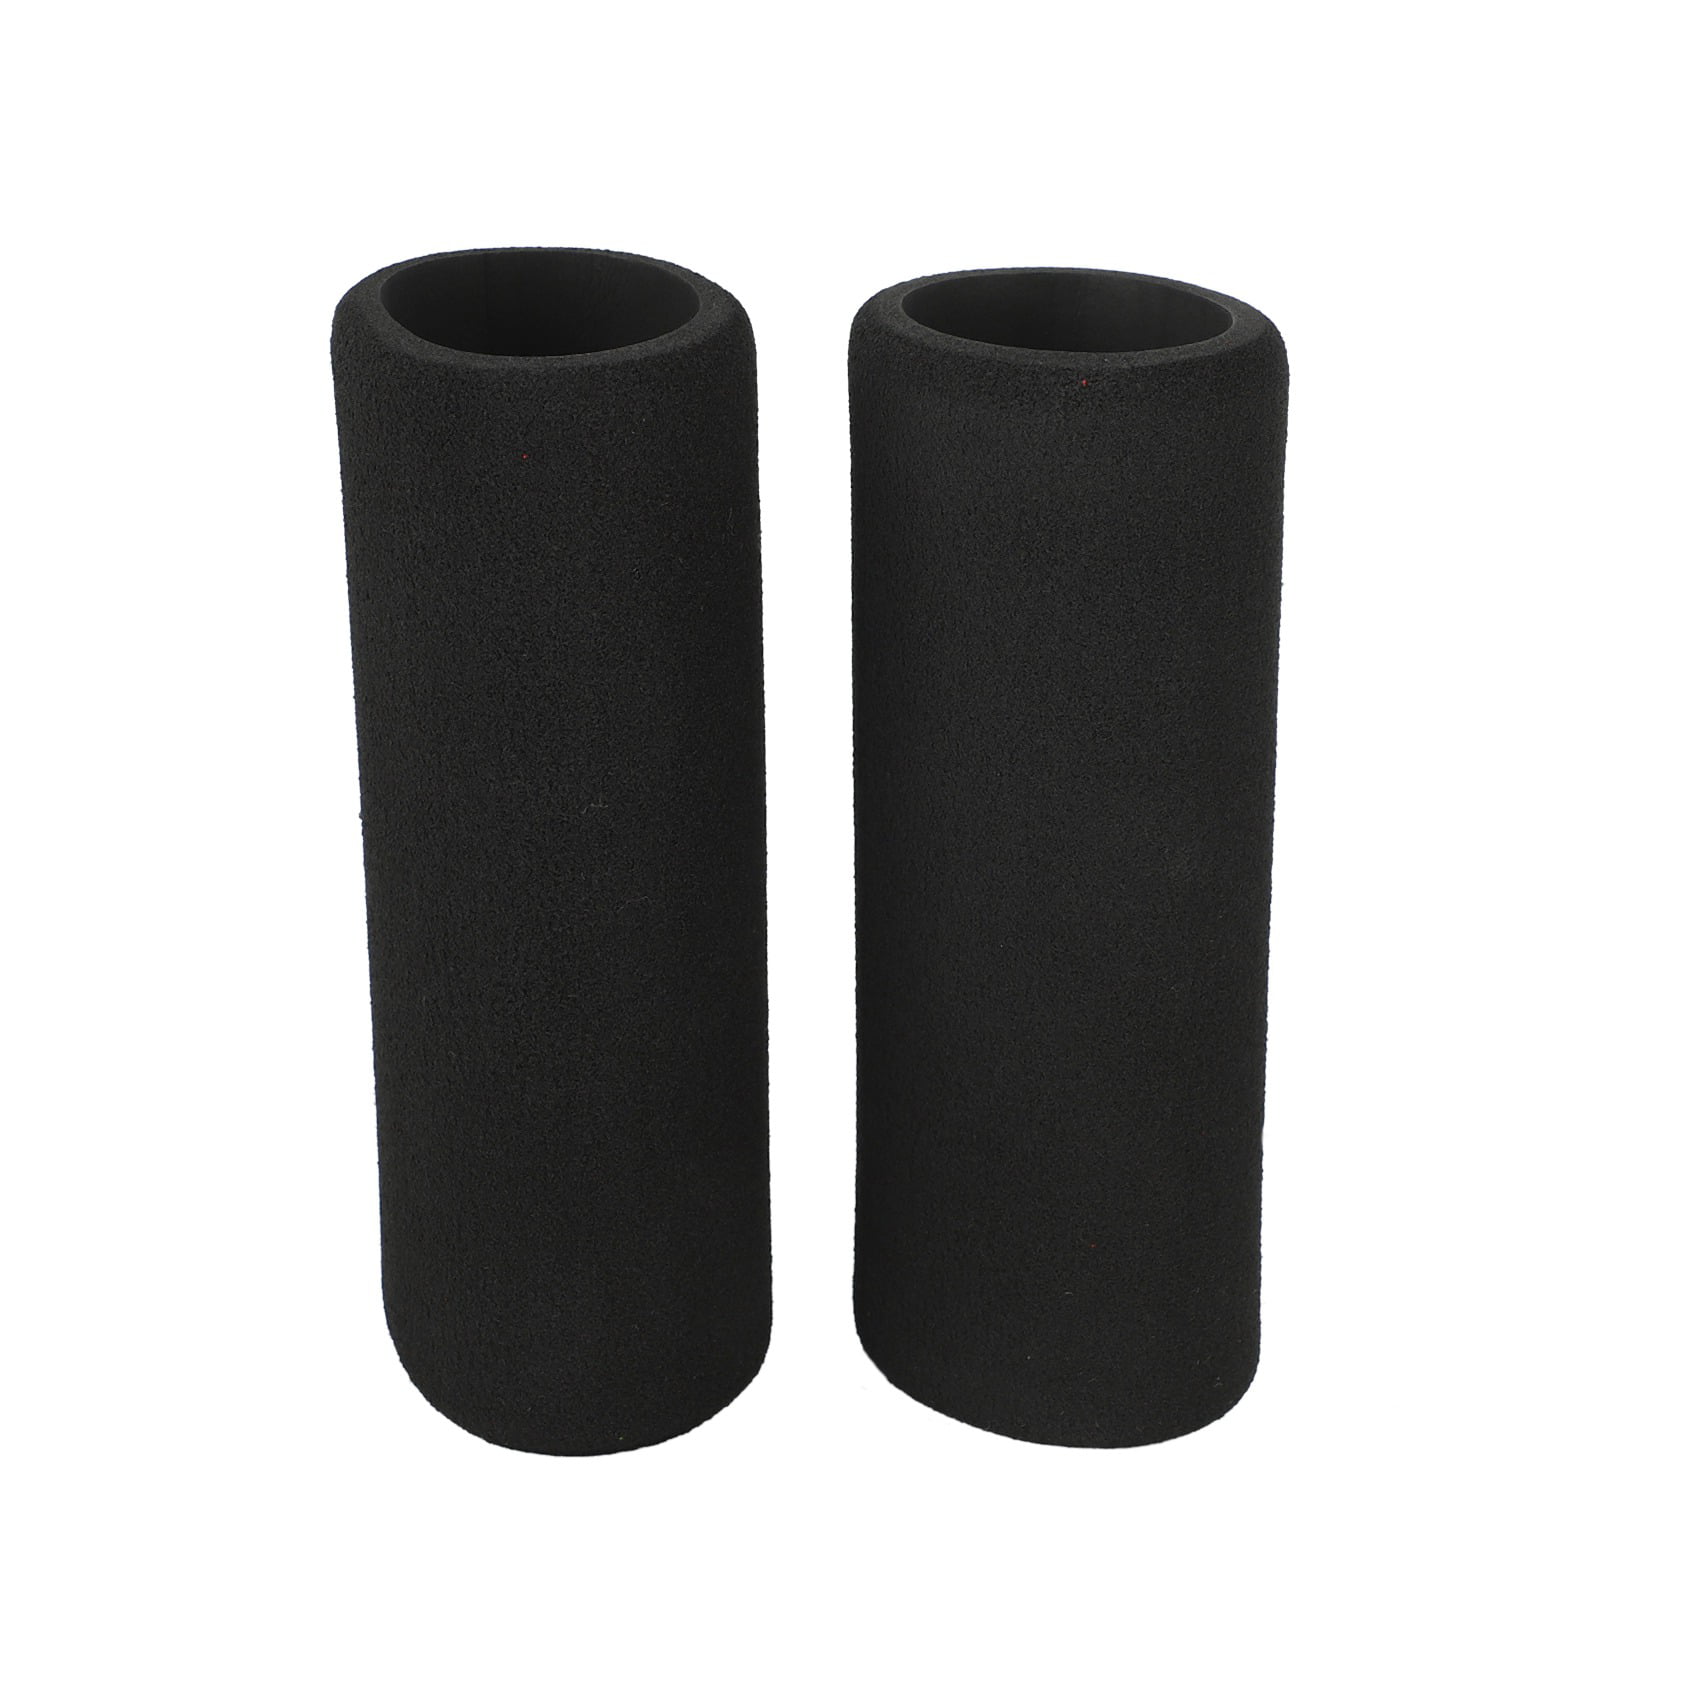 Red Motorcycle Scooter Quad Slip-on Foam Handlebar Grip Covers improved comfort